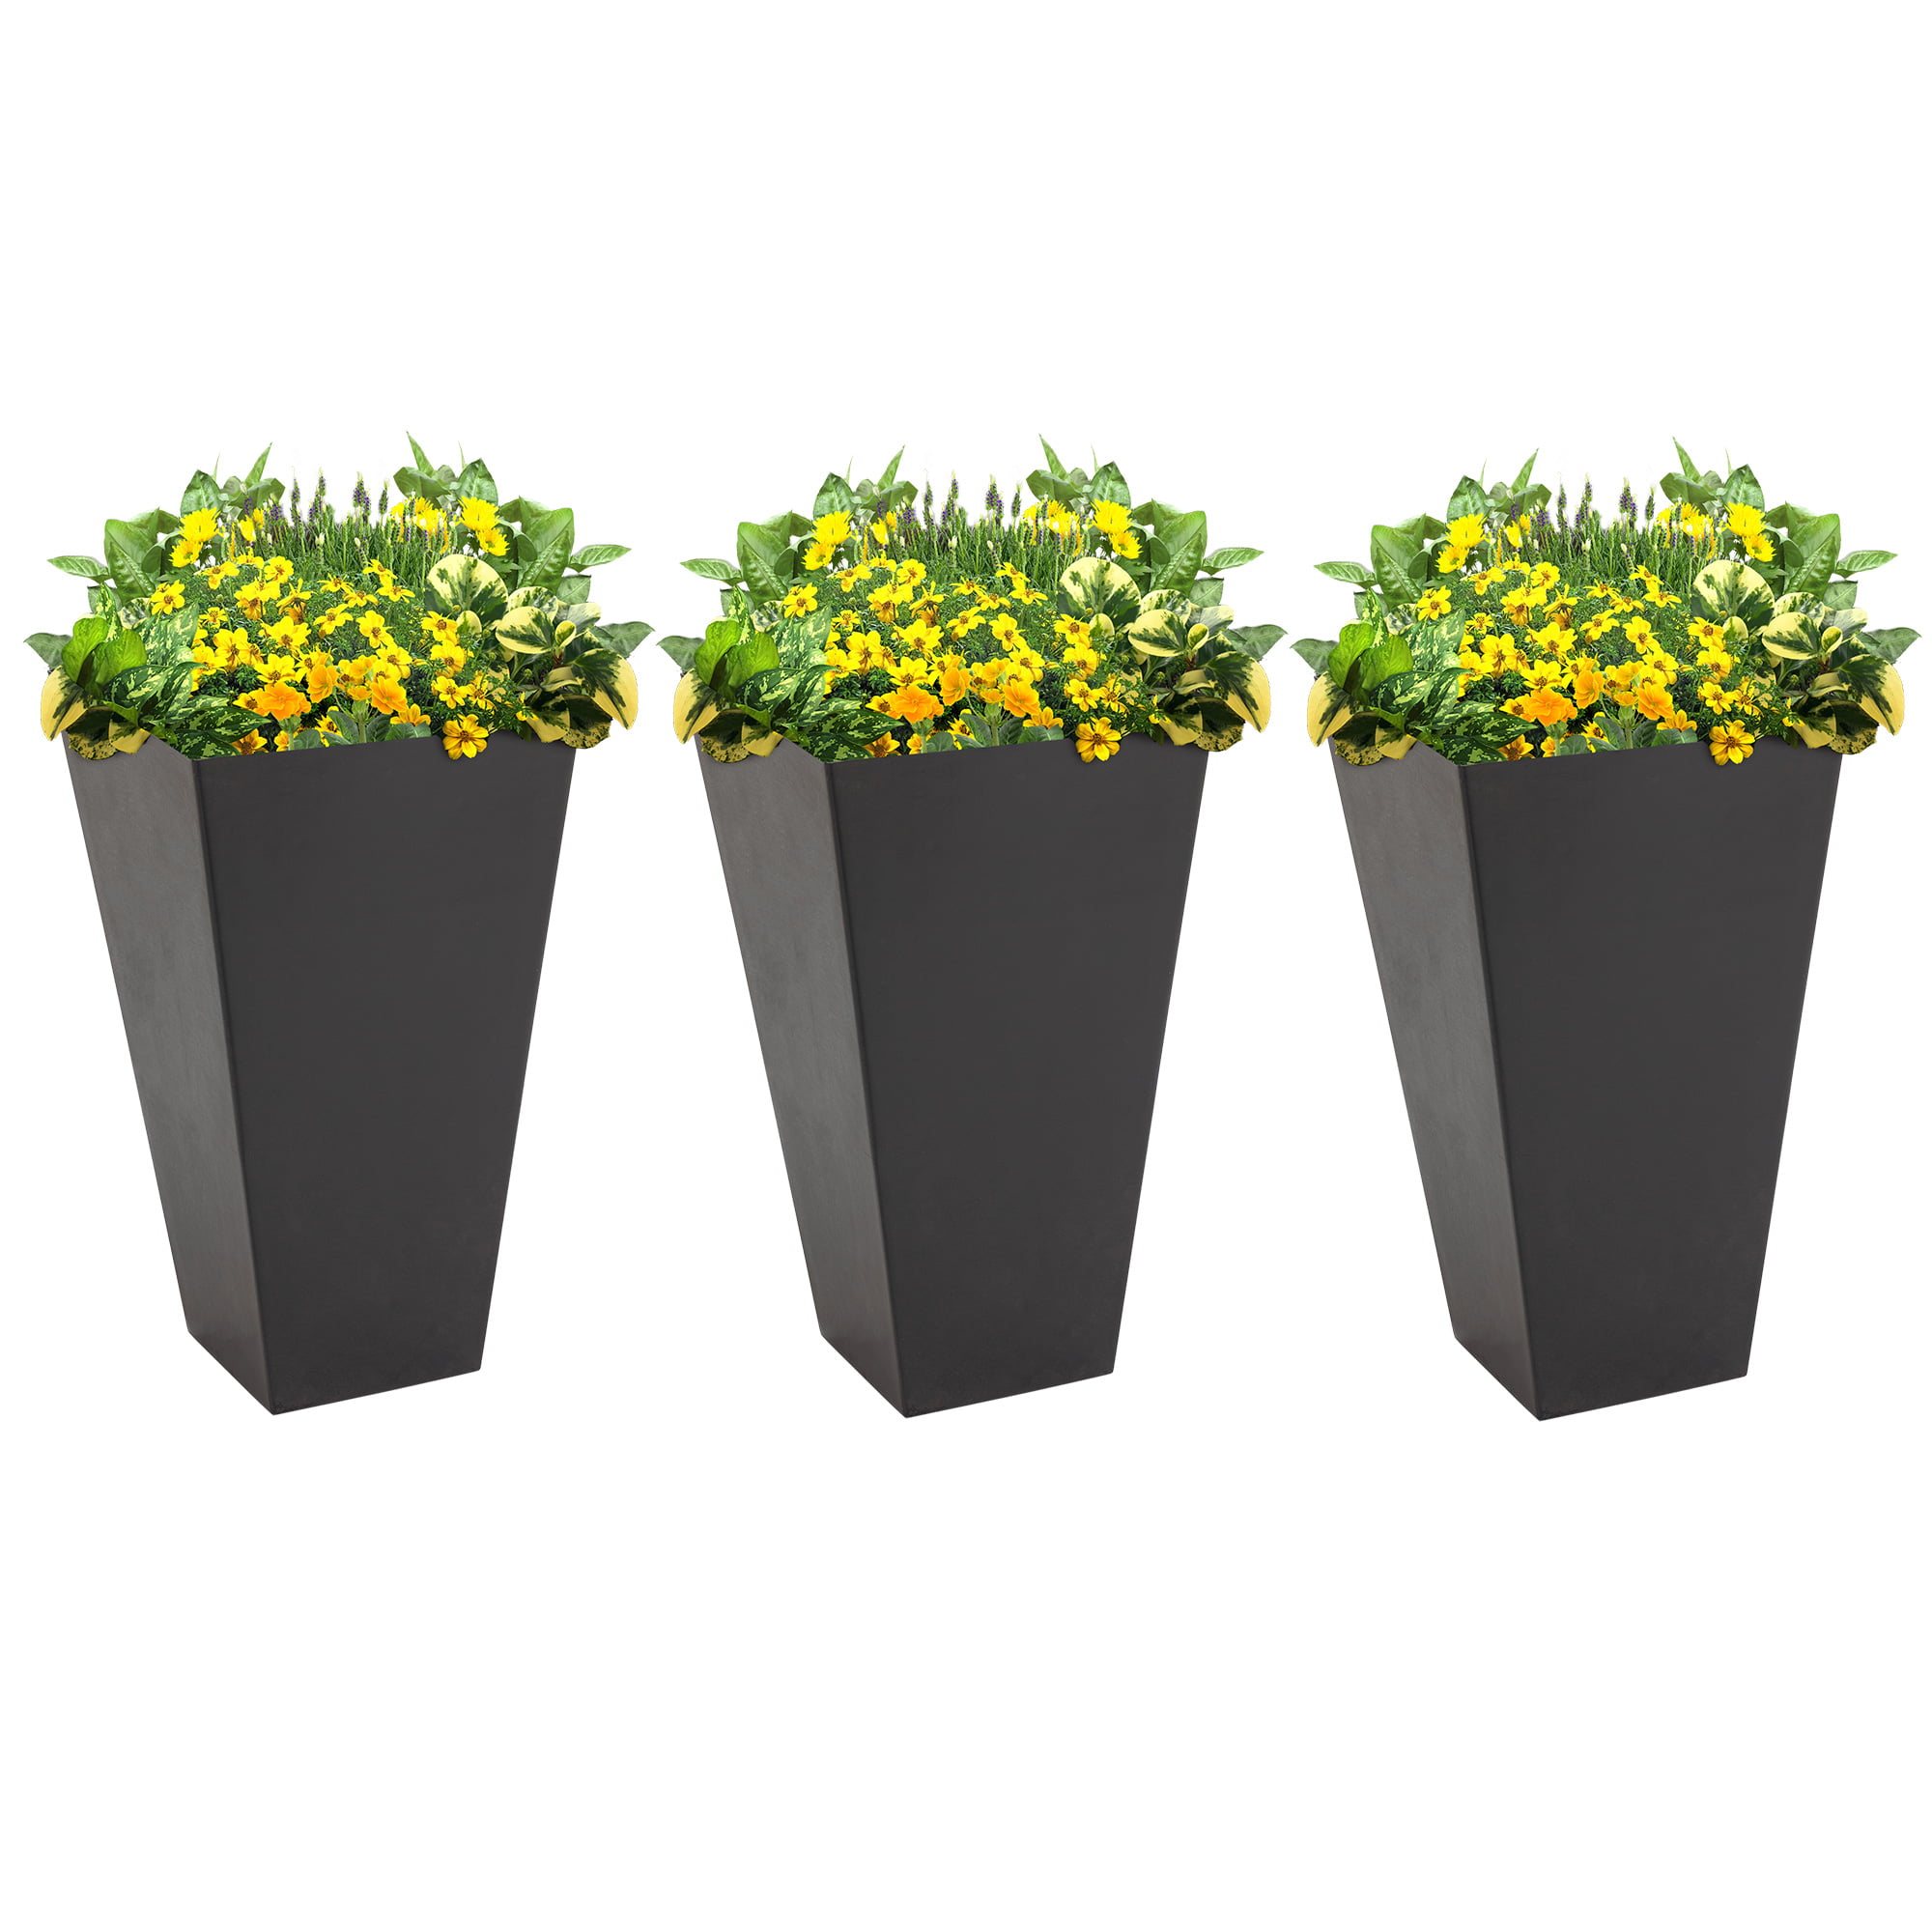 11.5-in 2 or 4 Pack 1 Self-Watering Square Plastic Garden Planter in Brown 